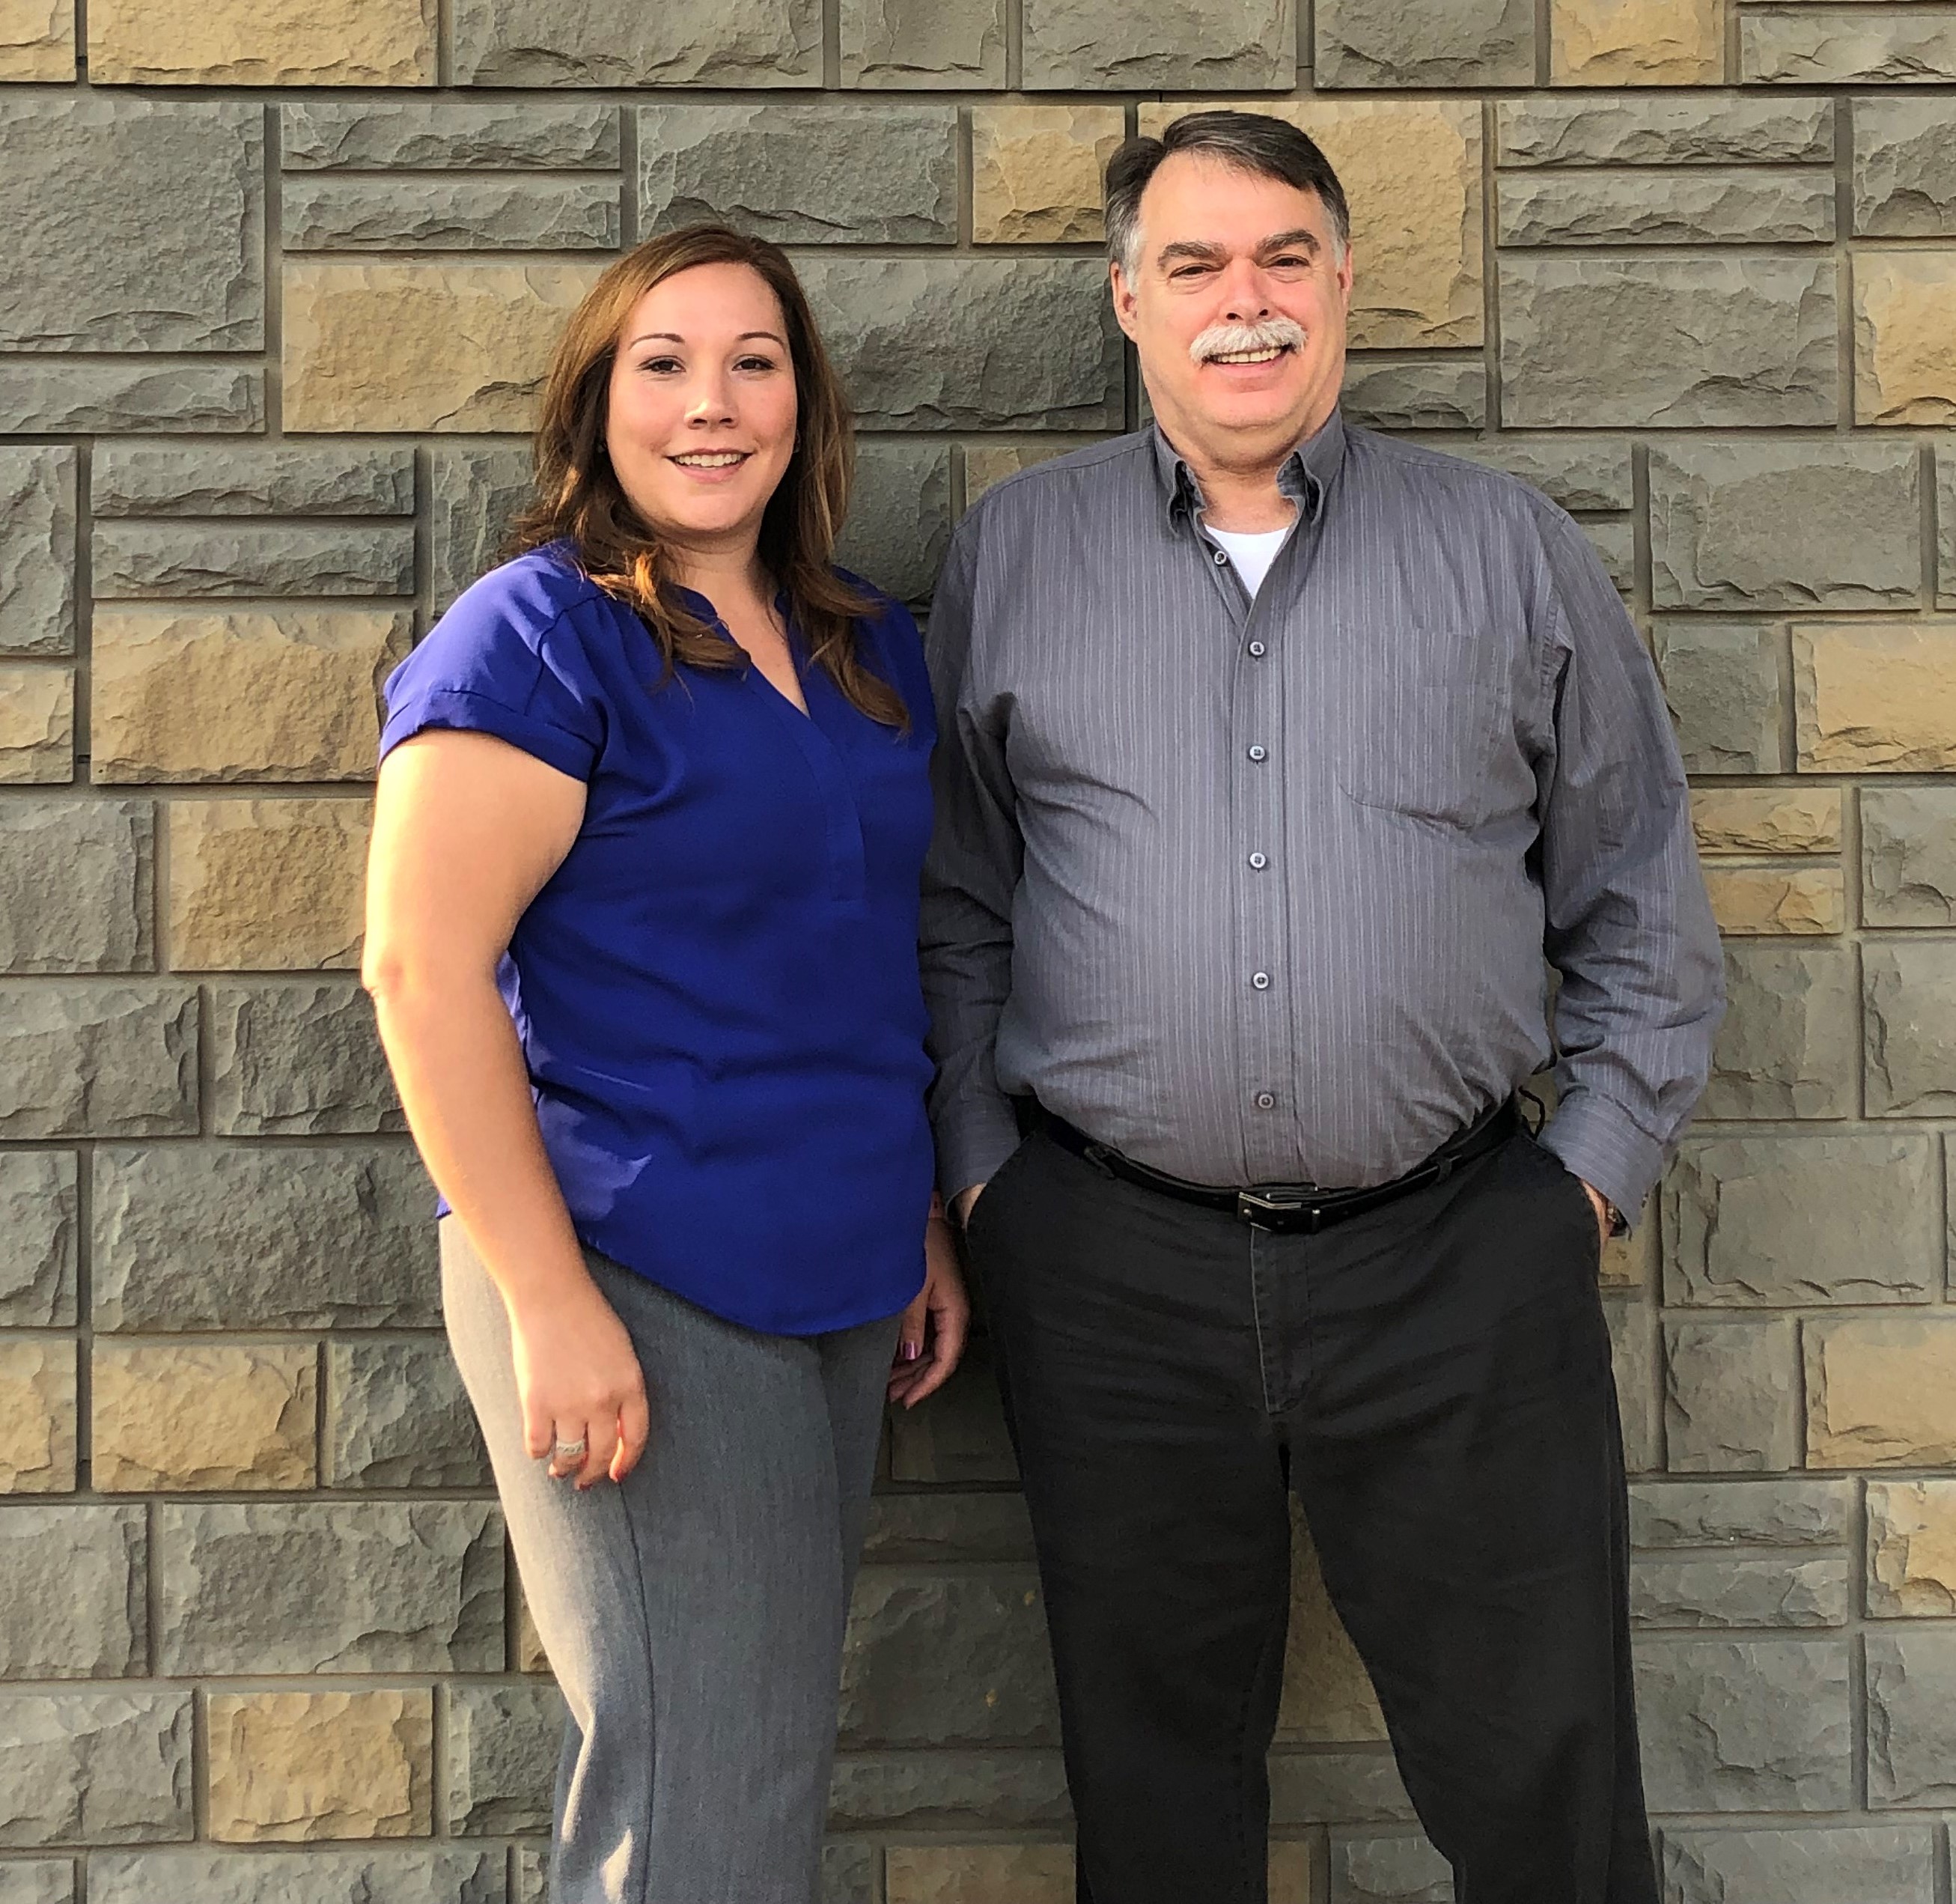 New Midnight Sun Home Care General Manager Becky Huntley and Kevin Turkington, CEO